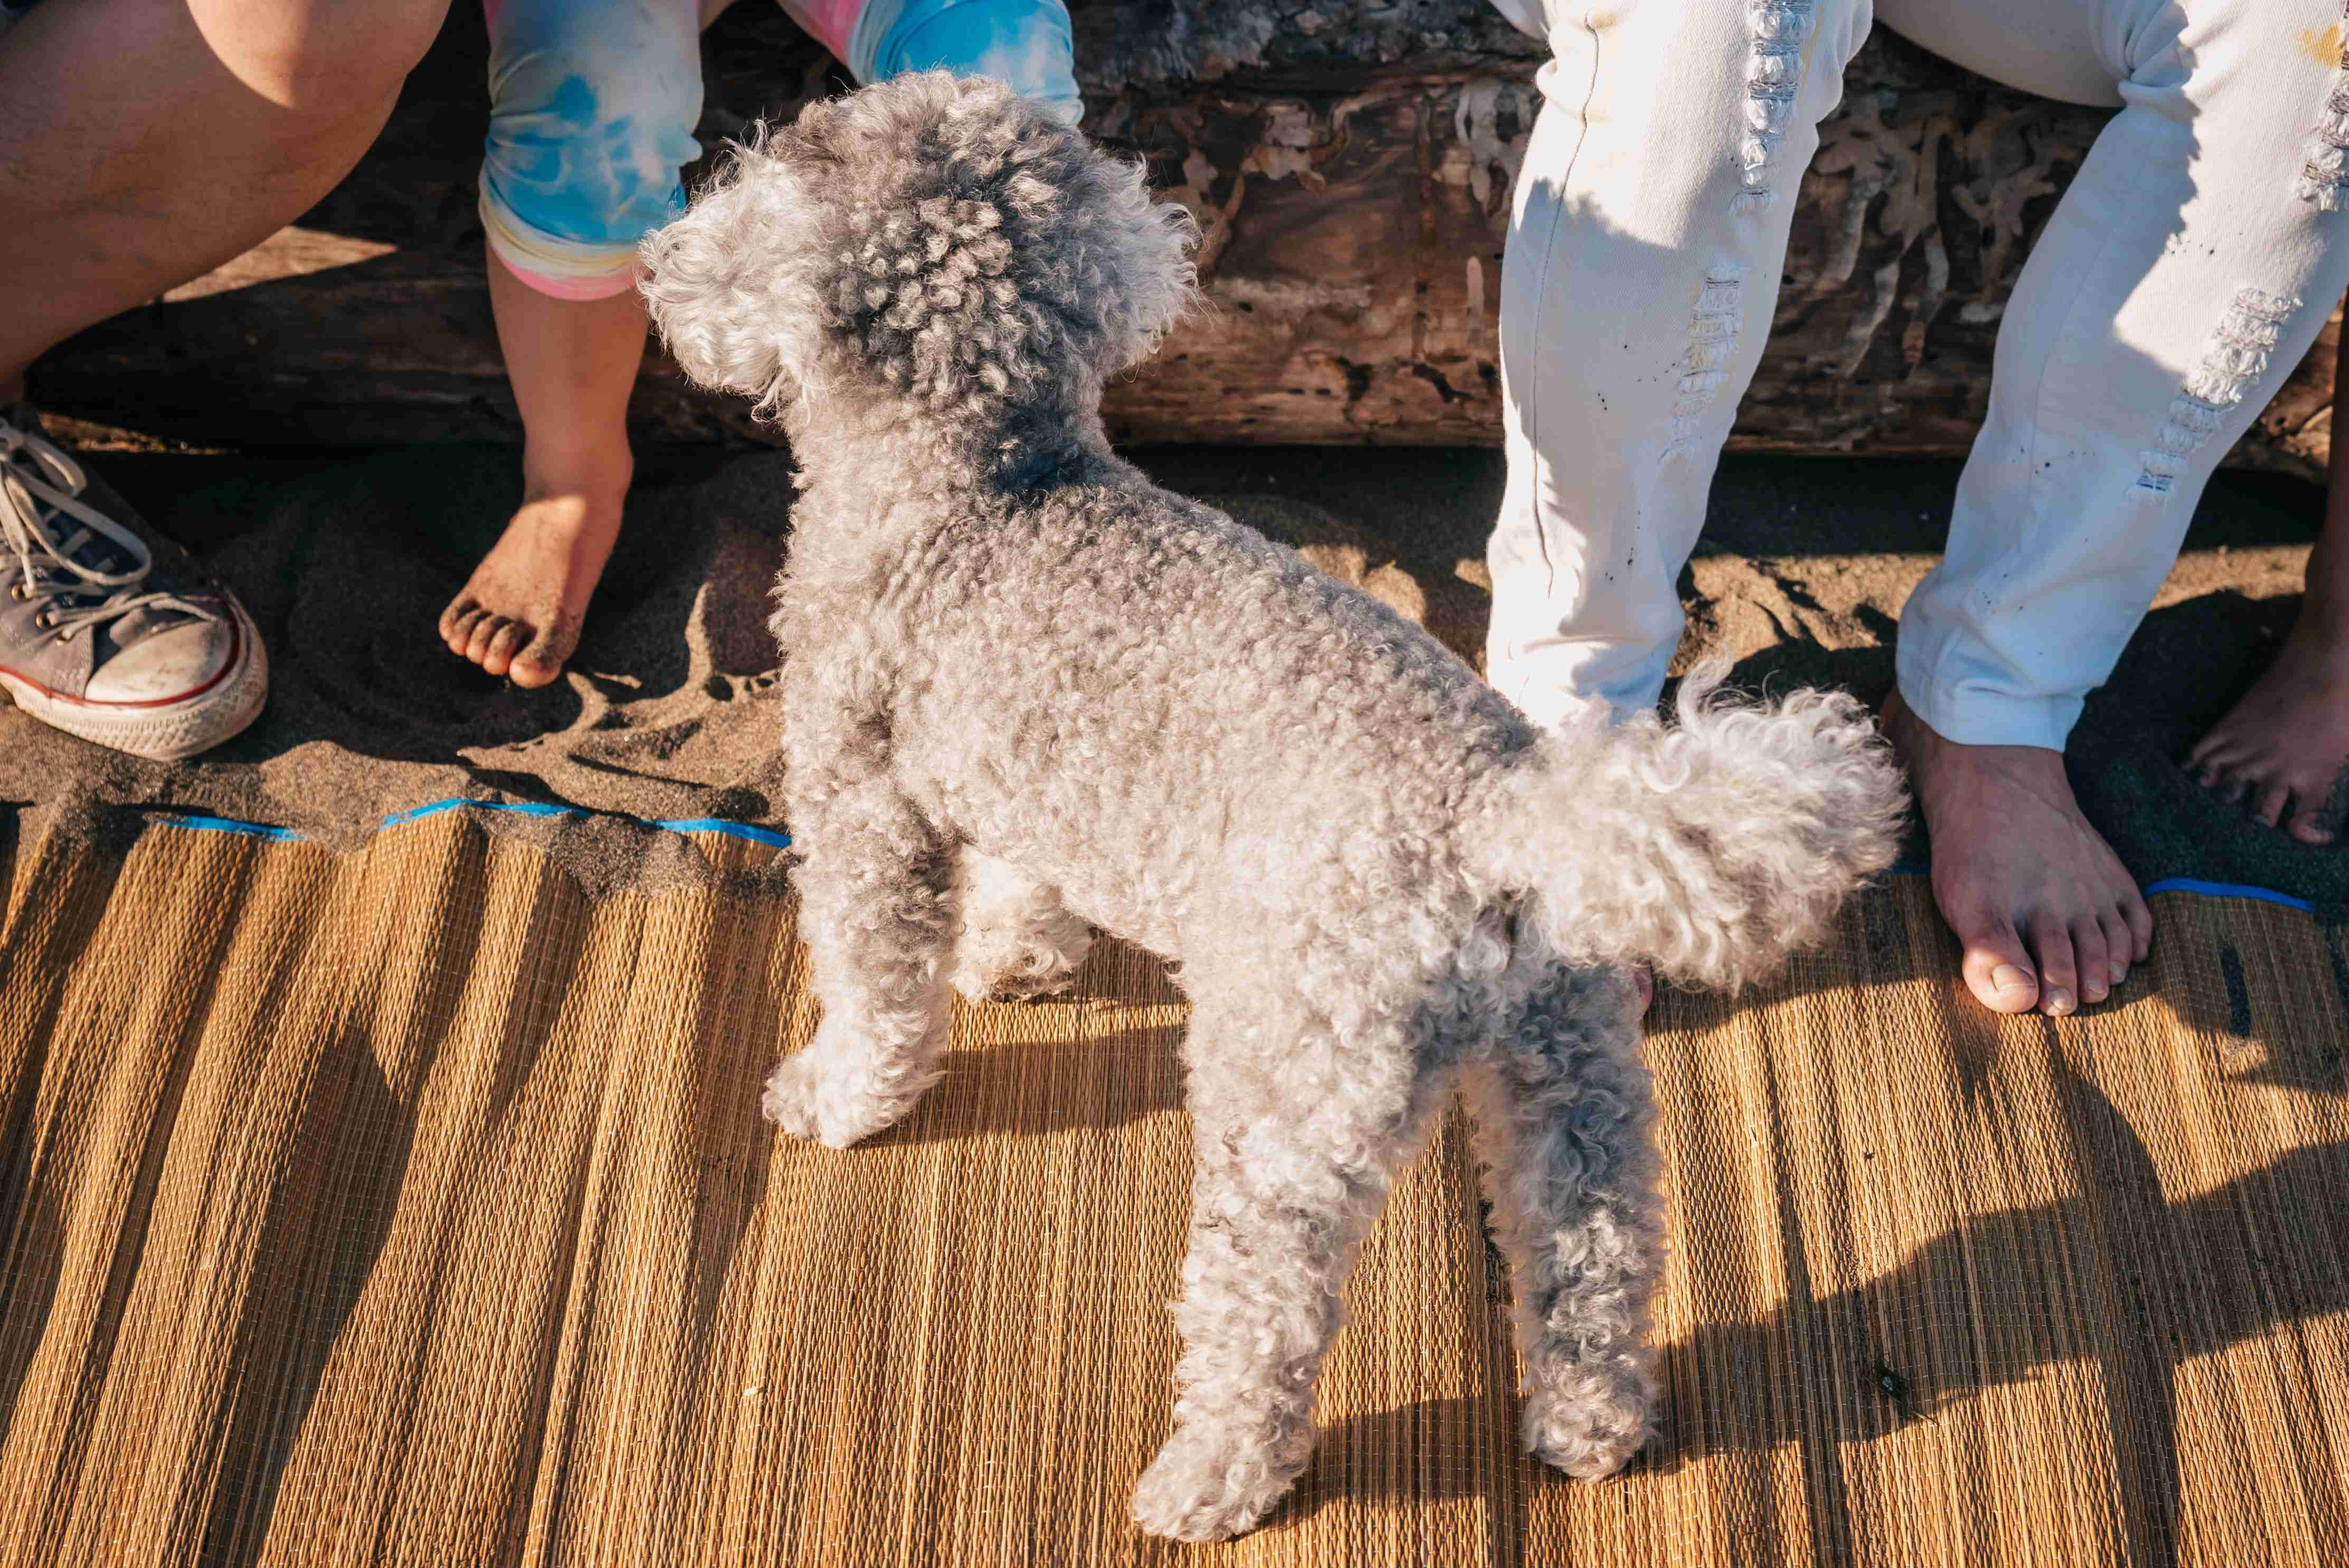 Did you encounter any behavioral issues during the first two weeks with your Poodle puppy?